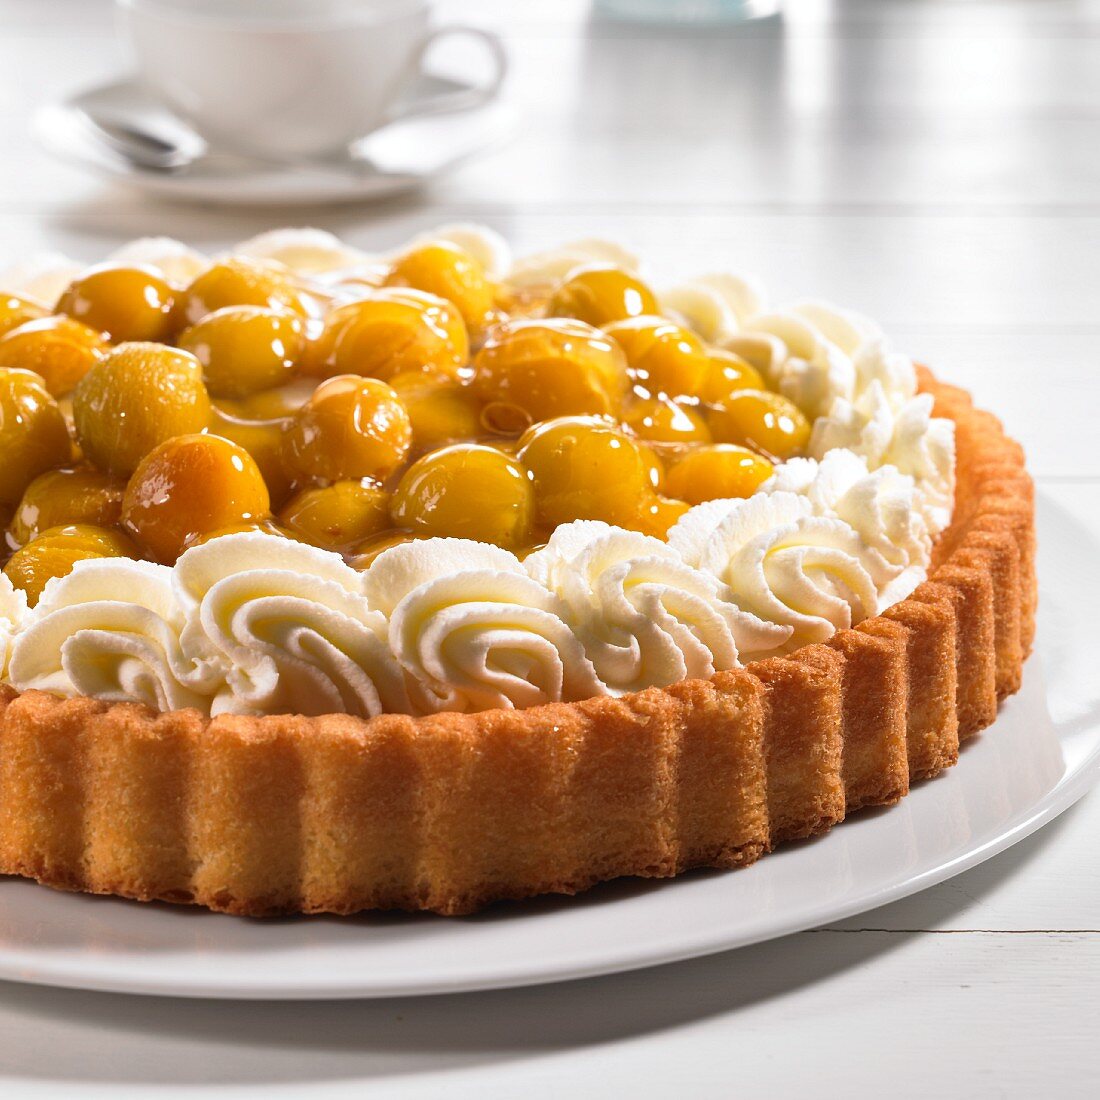 Mirabelle tart with whipped cream